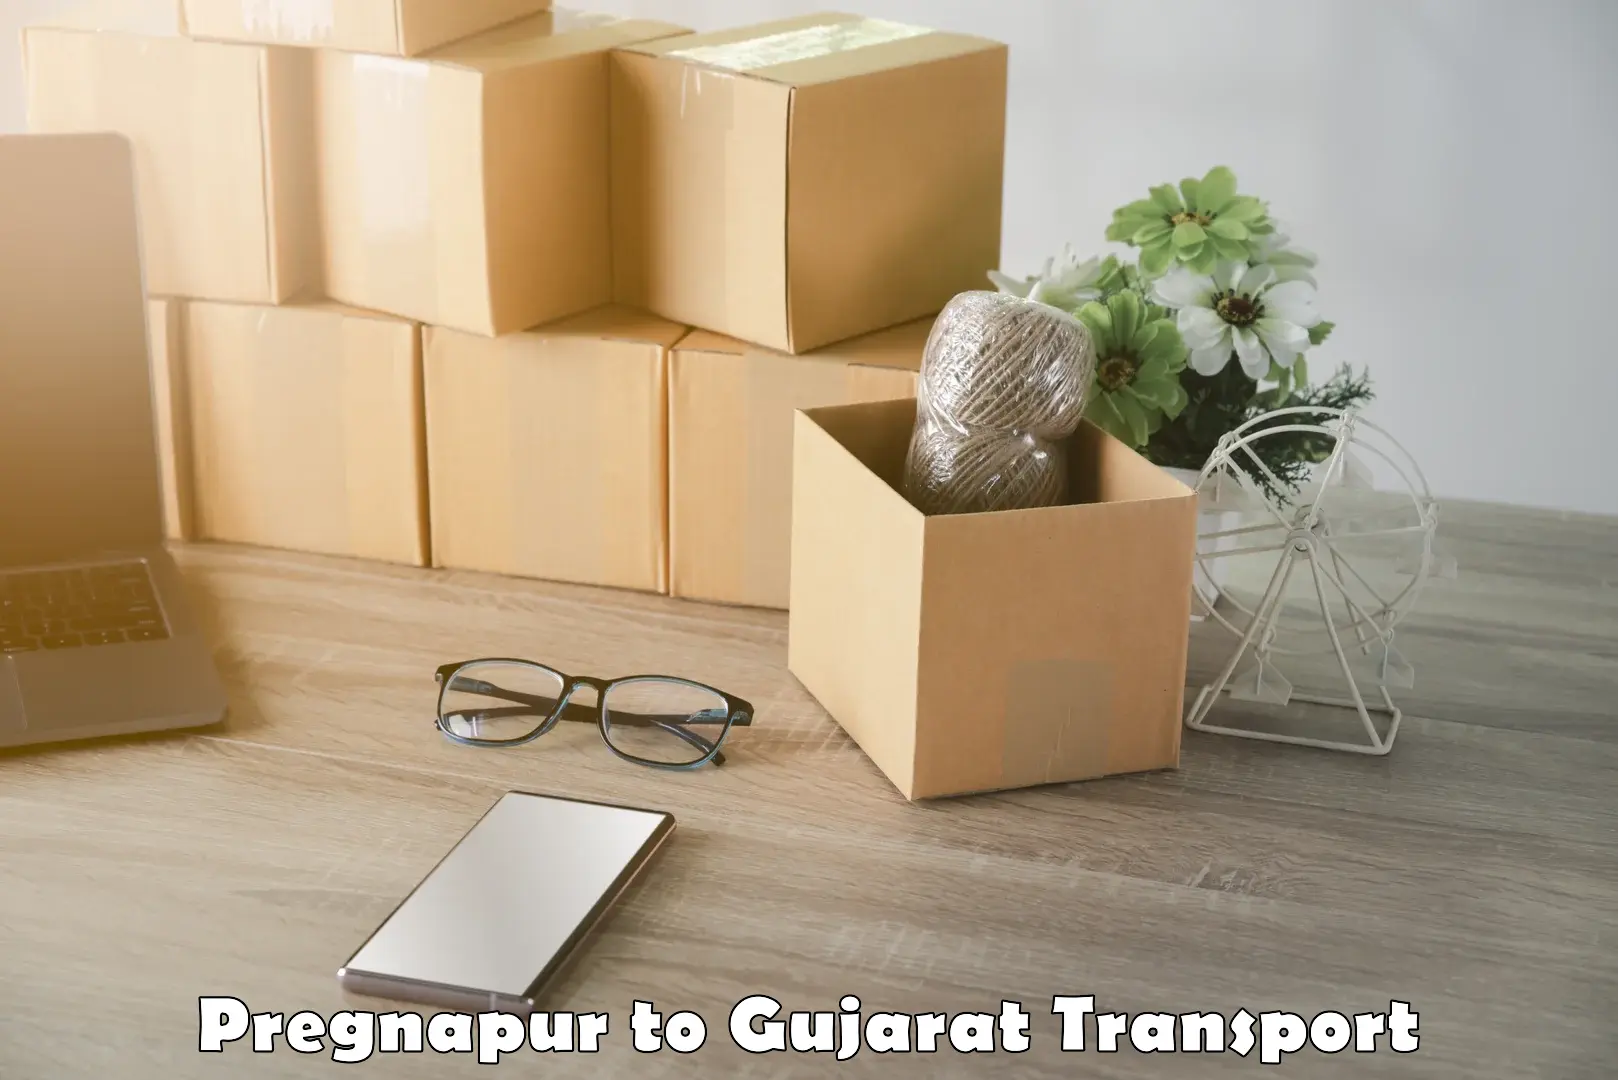 Online transport booking Pregnapur to Anand Agricultural University